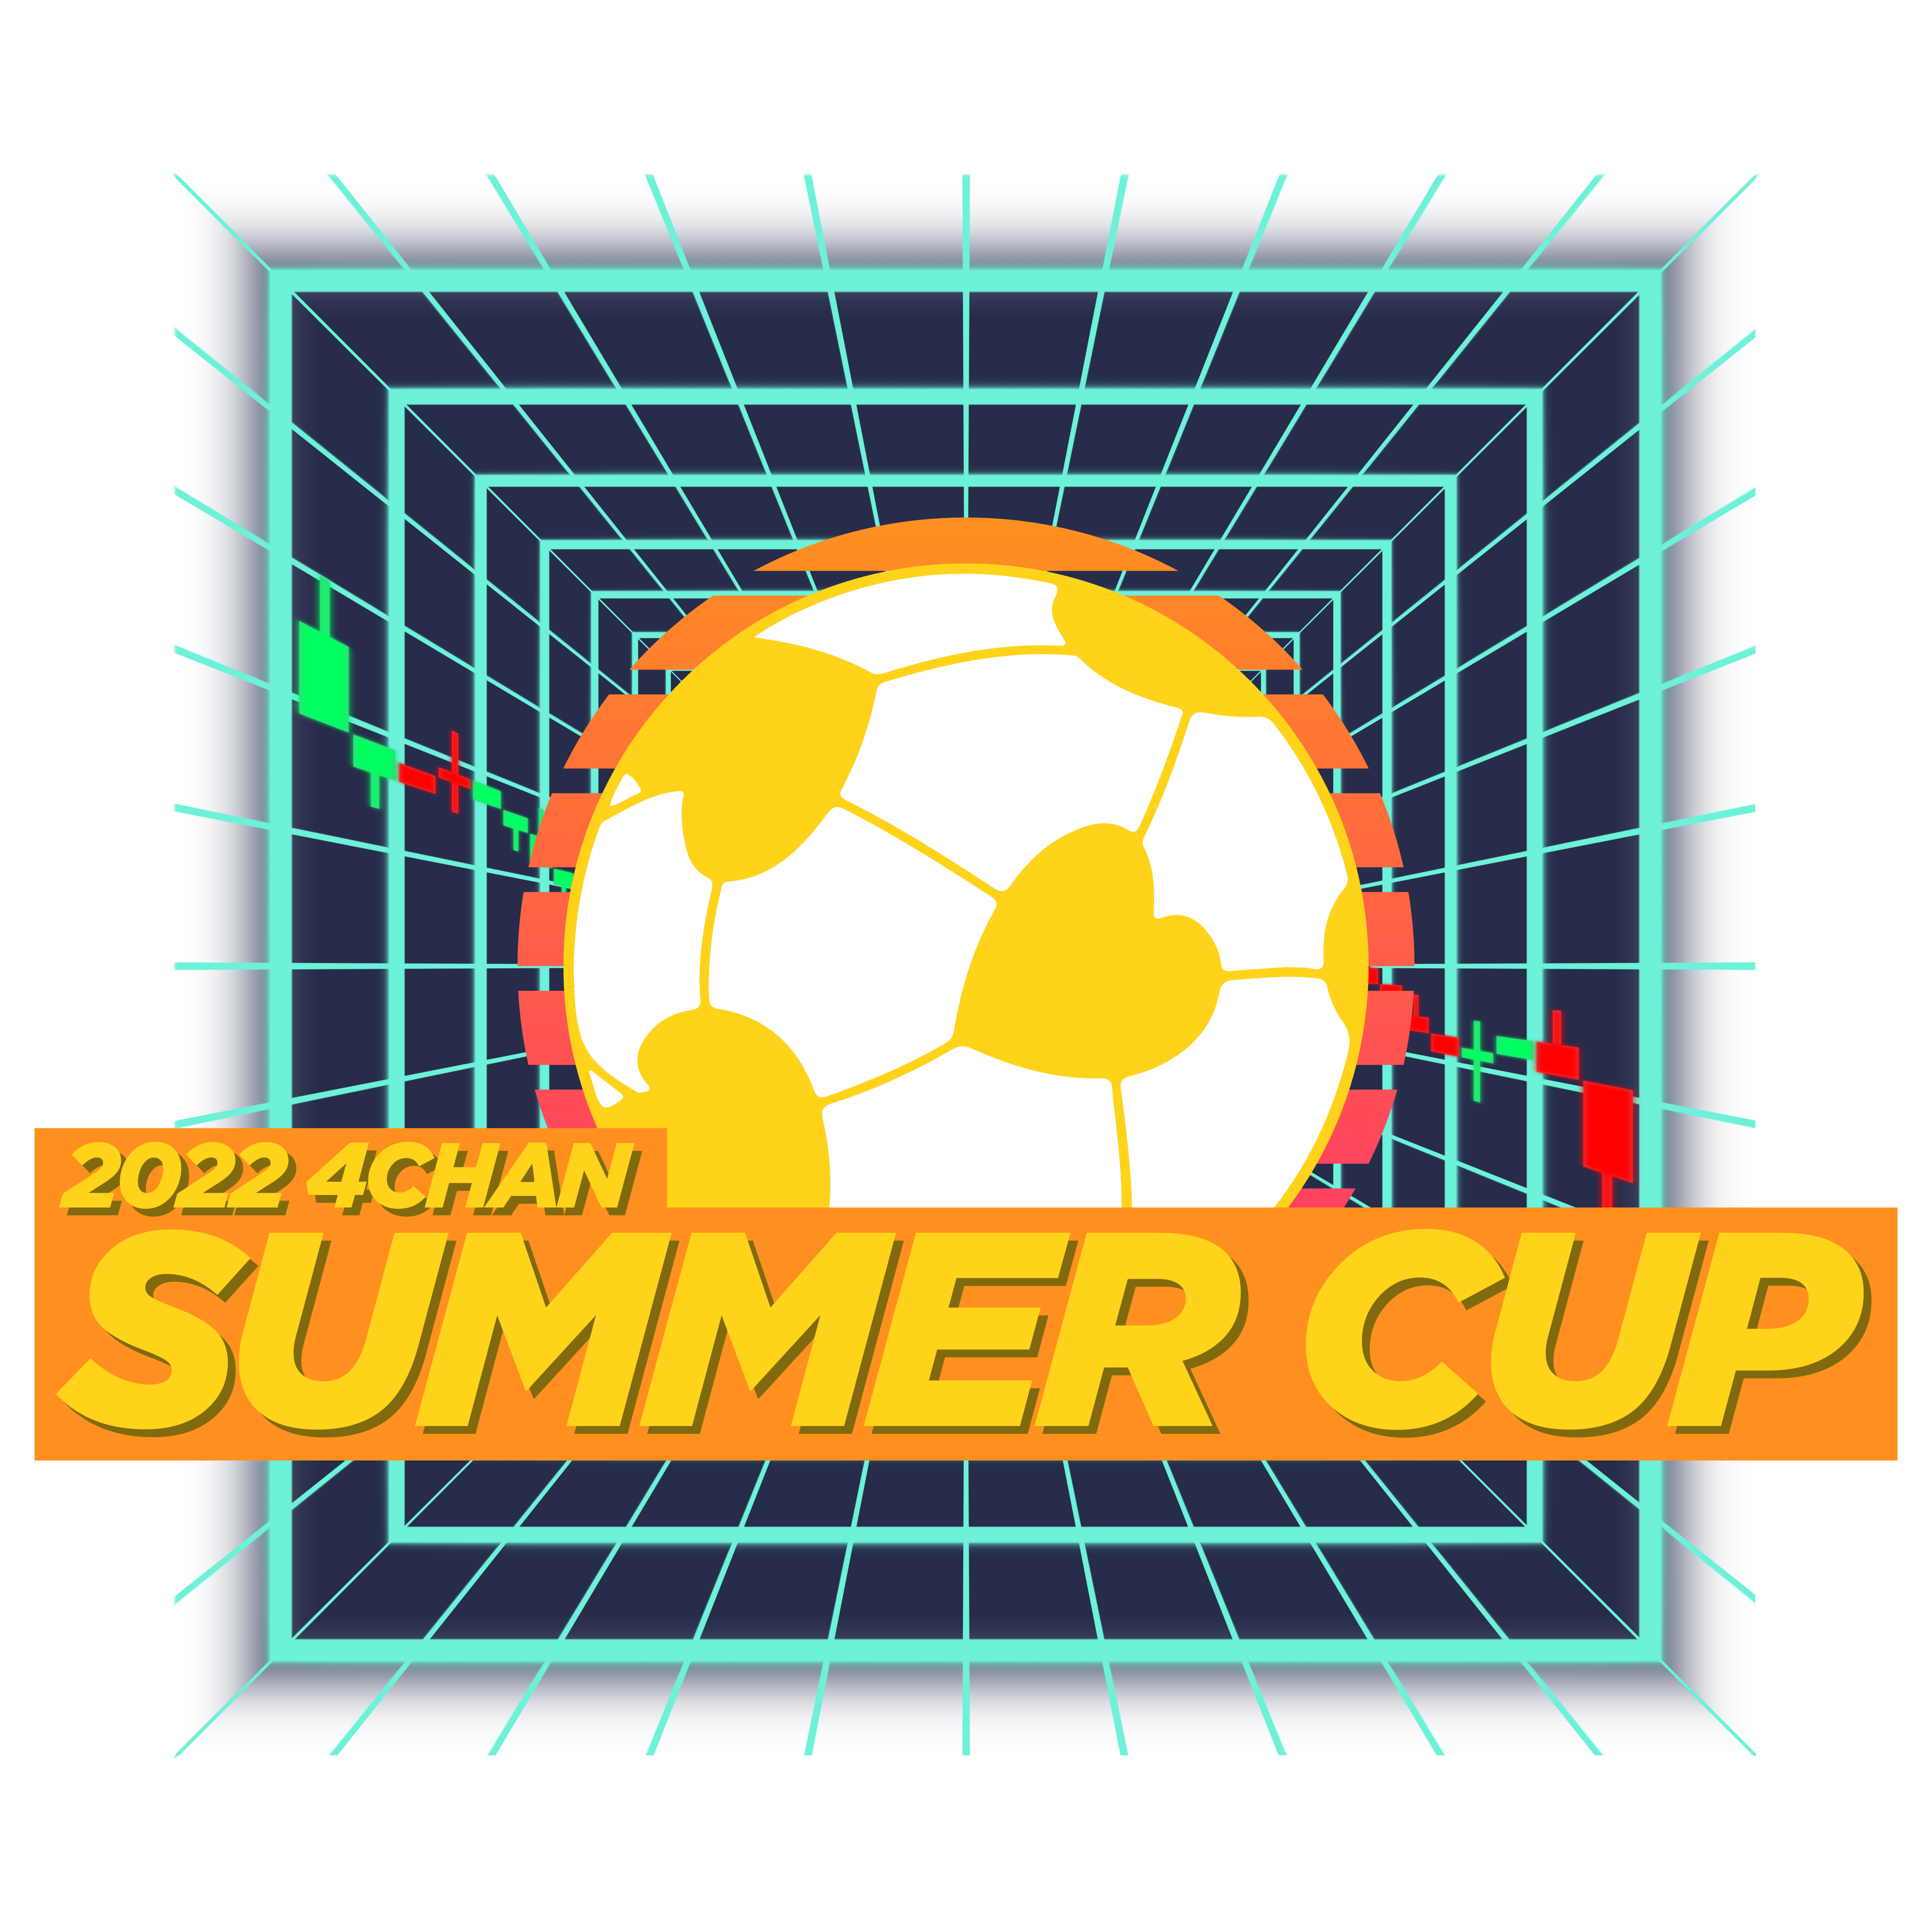 2022 4chan Summer Cup